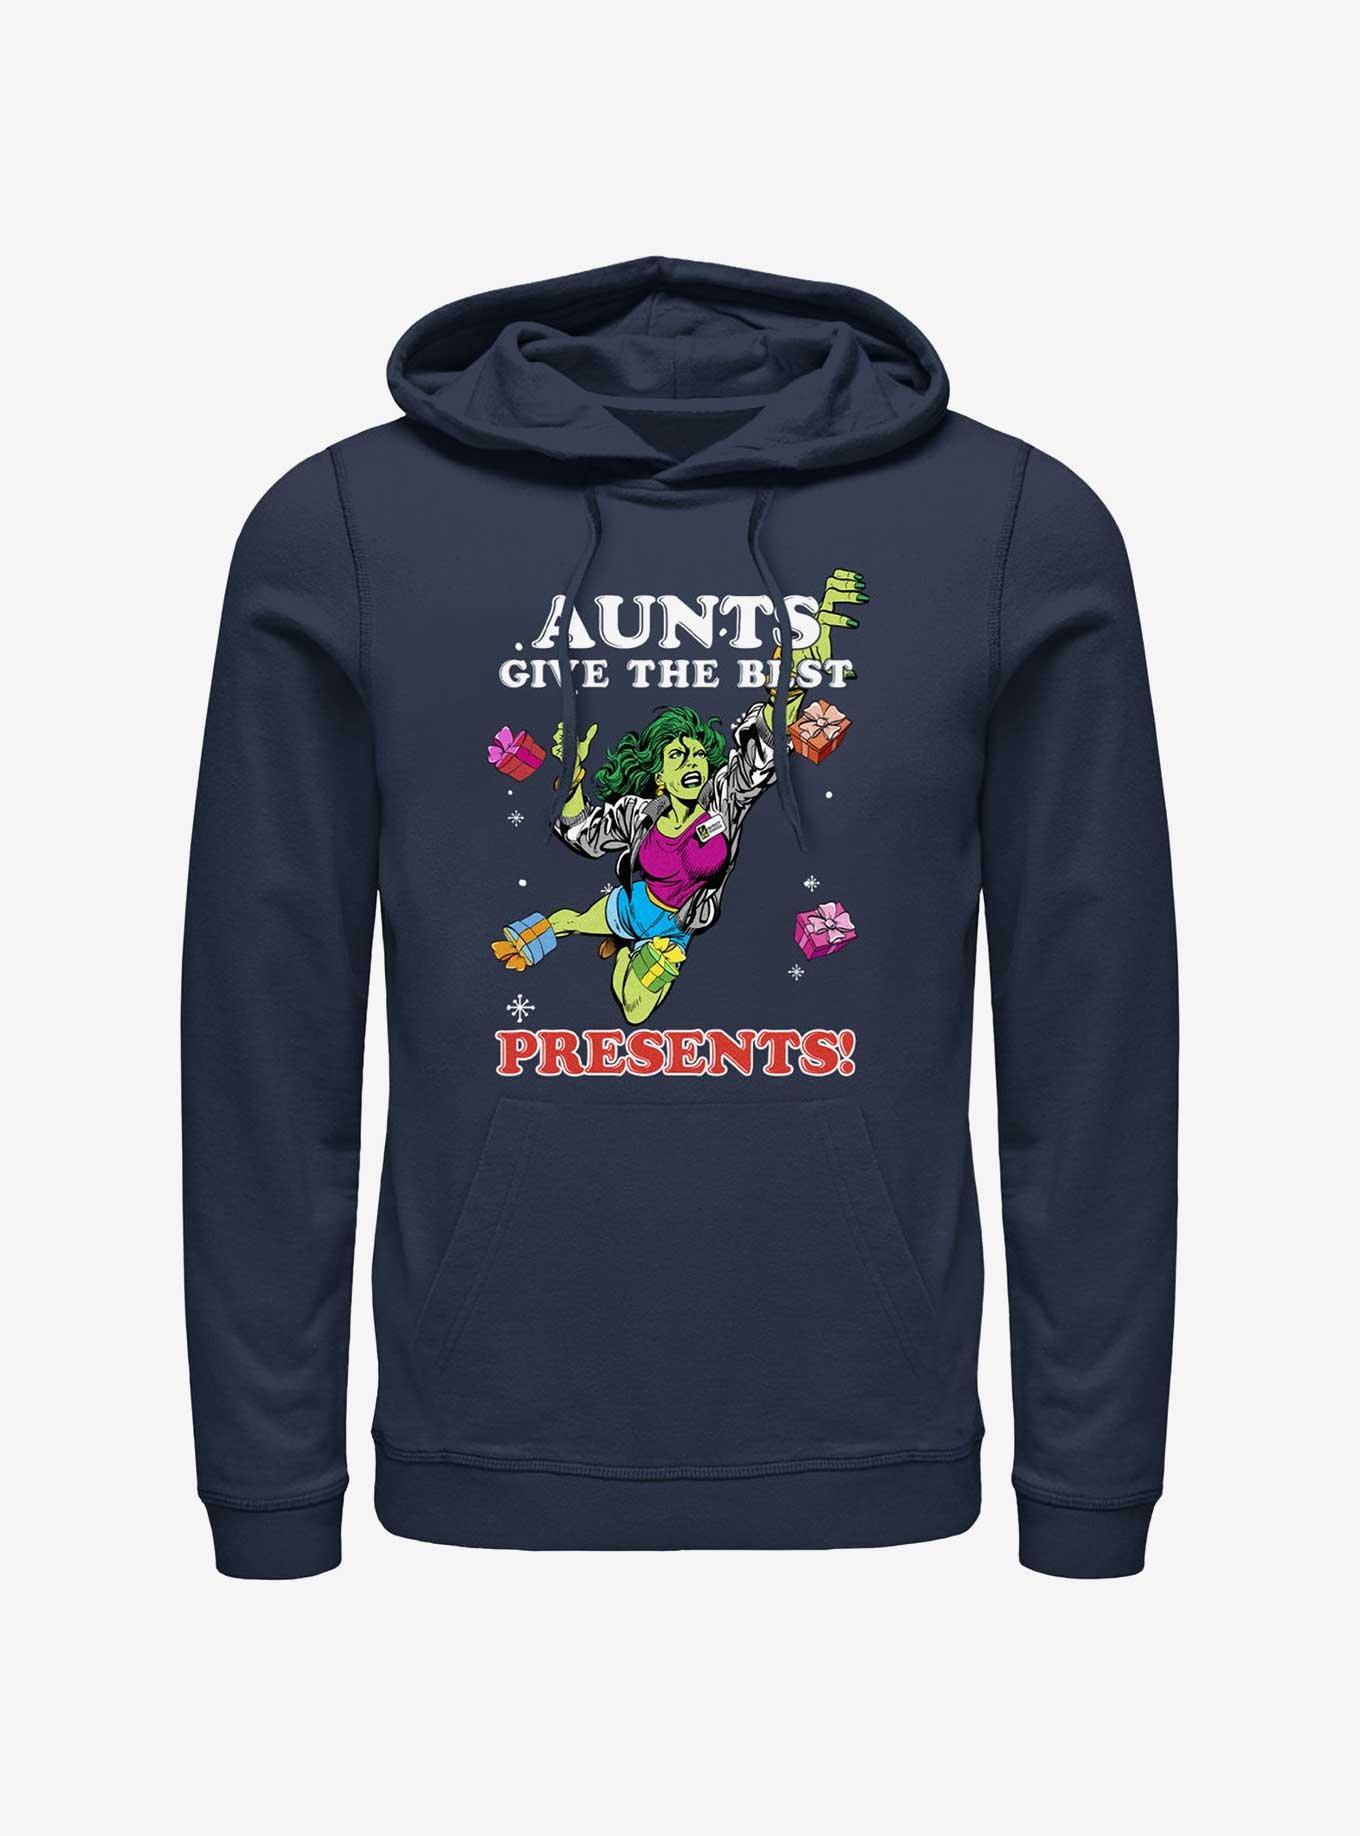 Marvel She-Hulk Aunts Give The Best Presents Hoodie, NAVY, hi-res